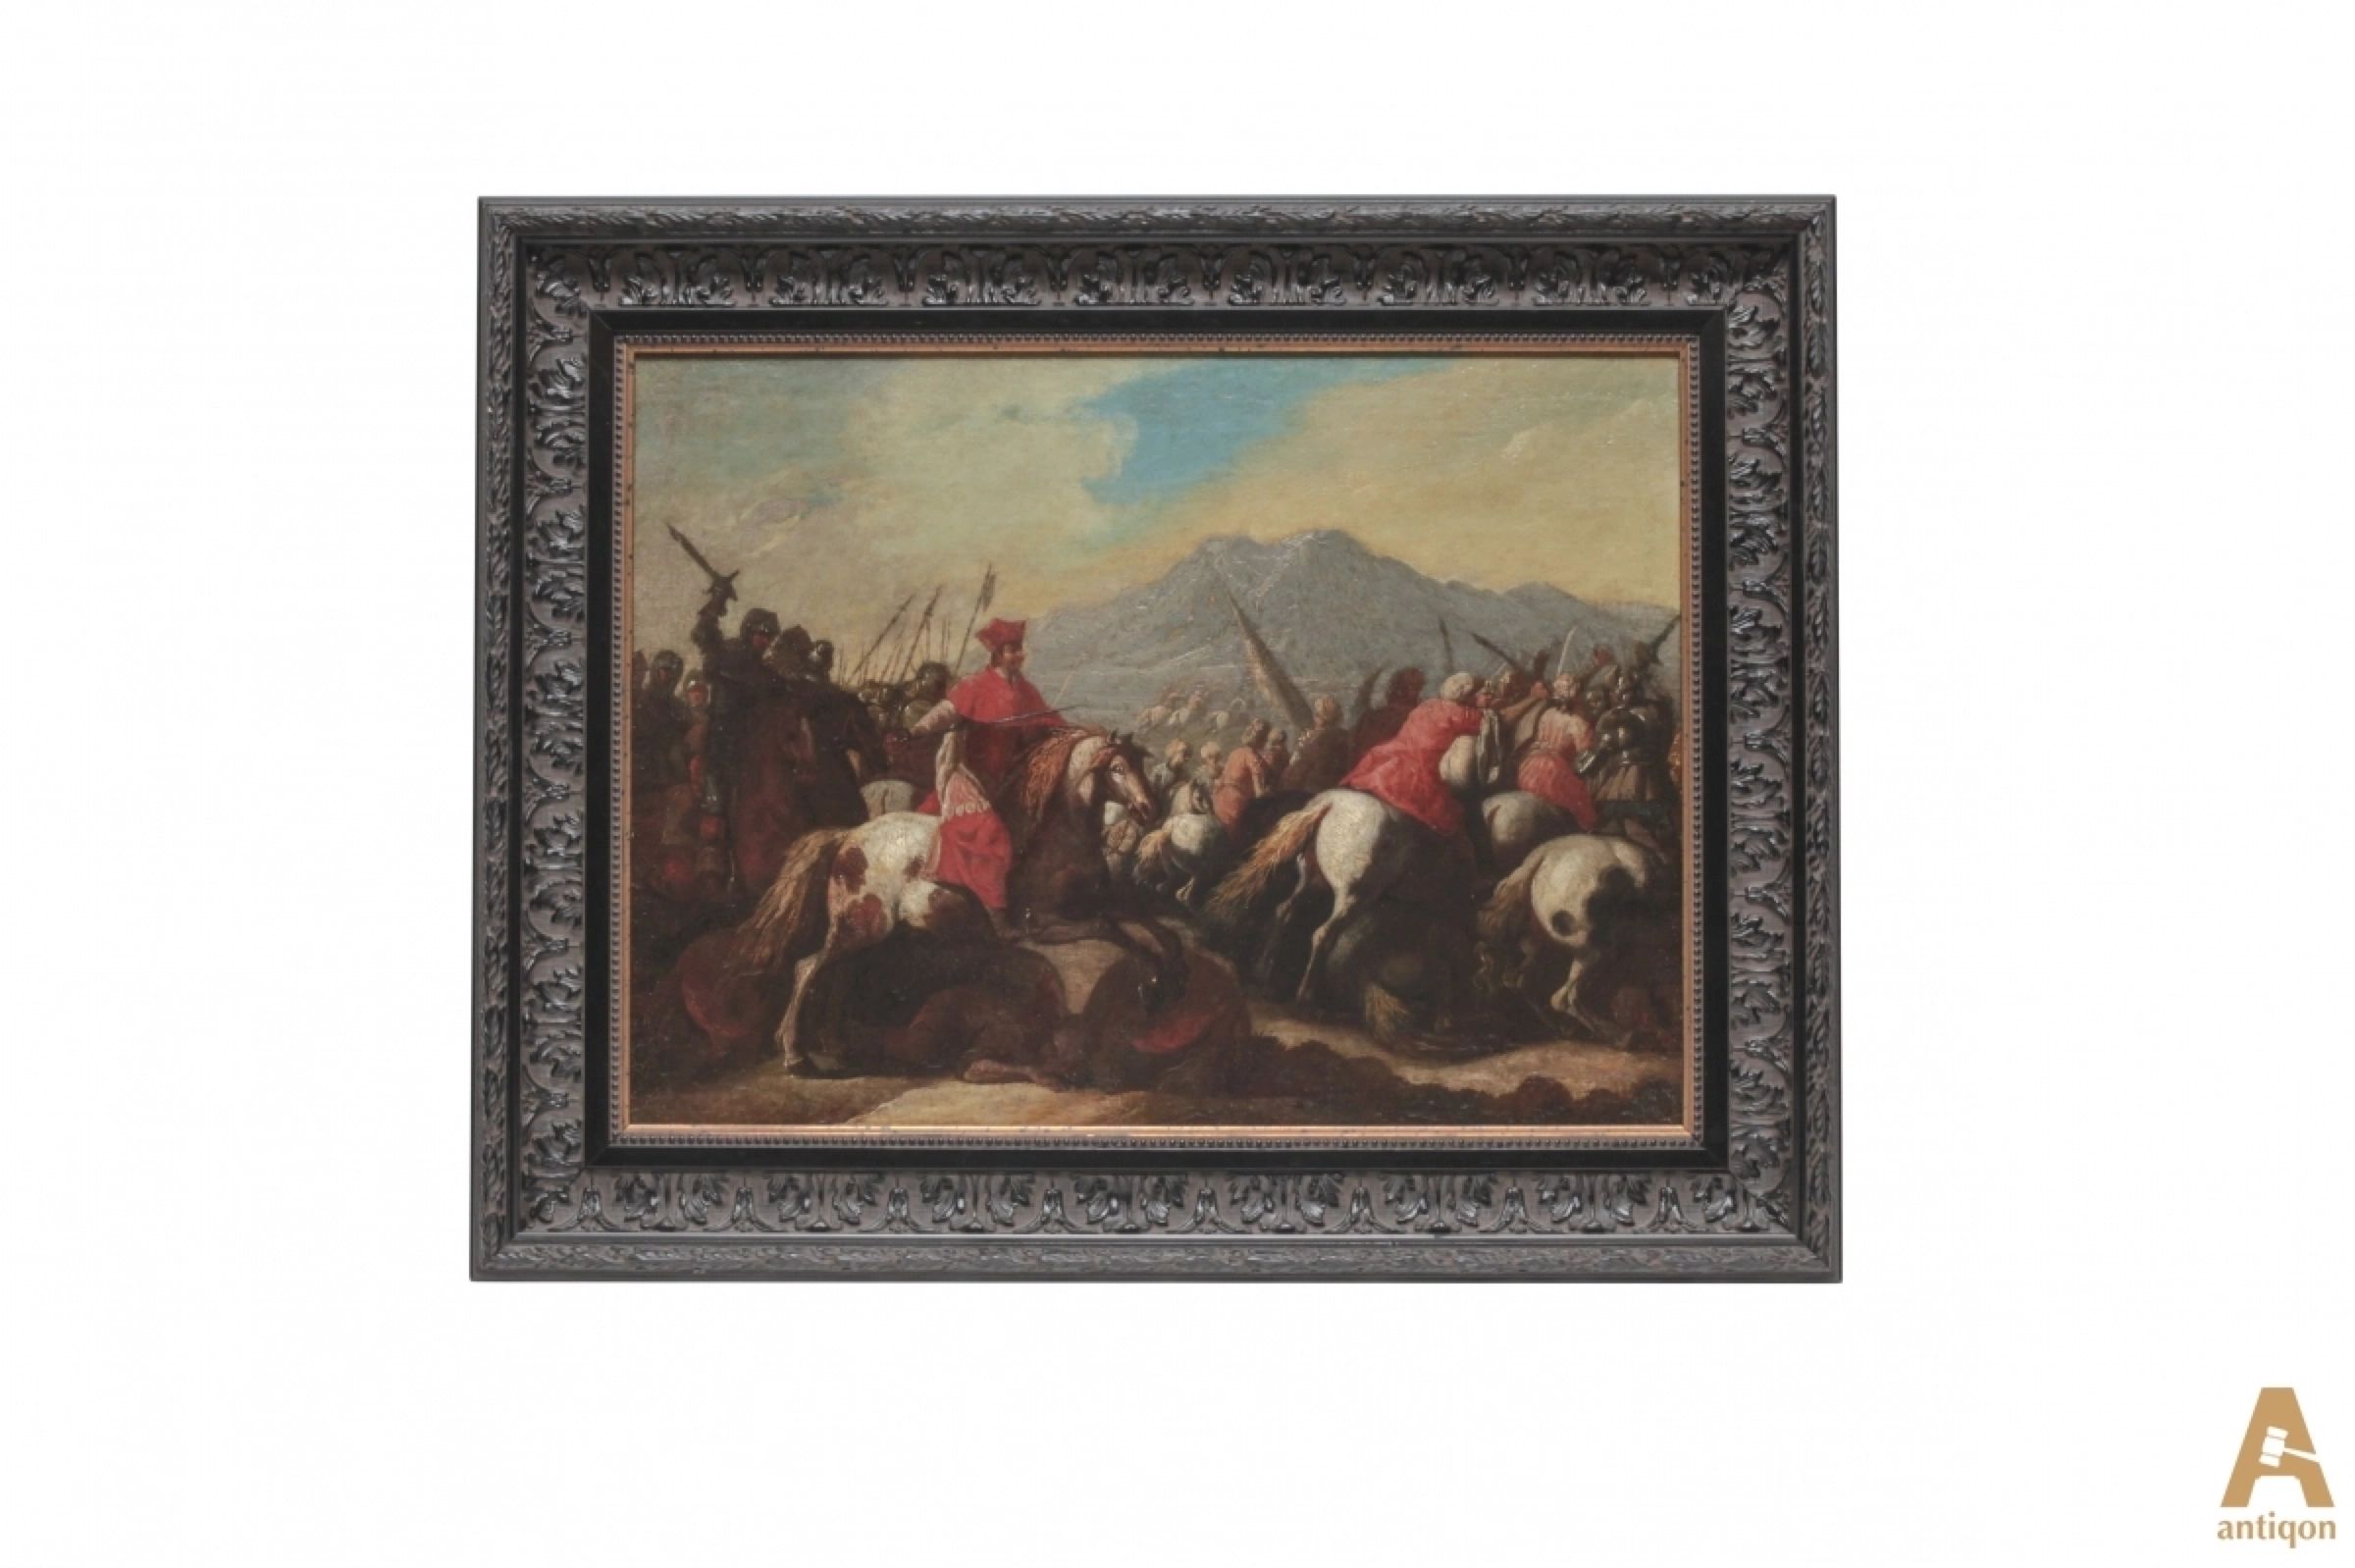 Battle-of-the-Crusaders-with-the-Saracens-Georg-Philipp-Rugendas-1666-1742-